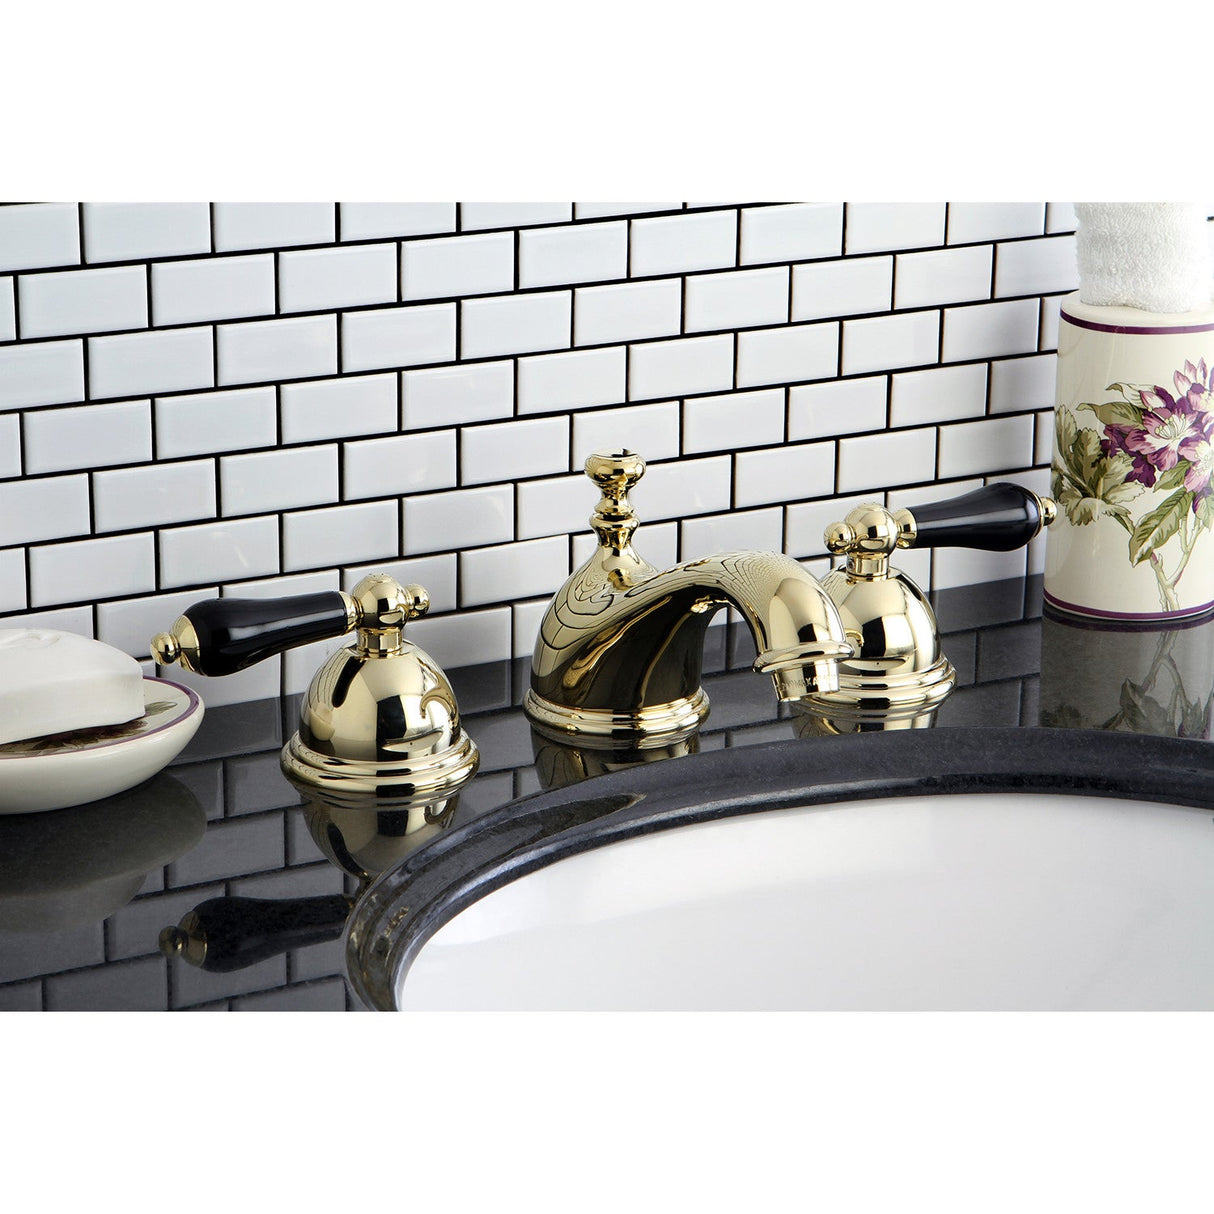 Duchess KS3962PKL Two-Handle 3-Hole Deck Mount Widespread Bathroom Faucet with Brass Pop-Up, Polished Brass